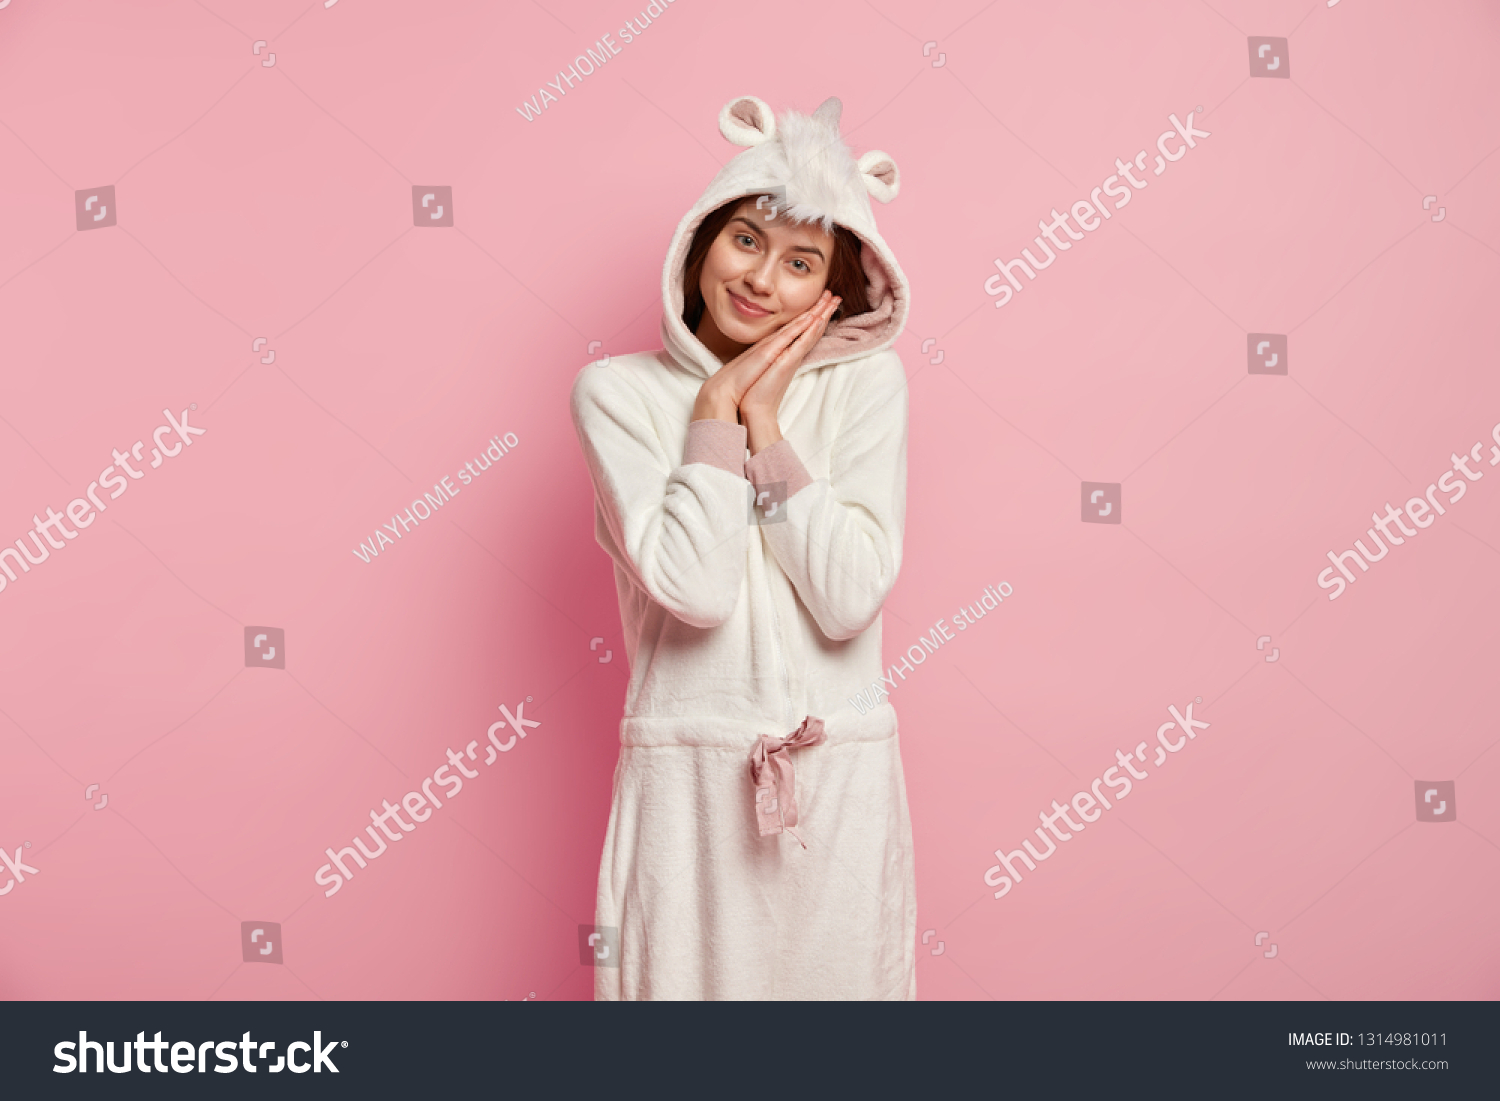 Restful girl leans at hands, enjoys good sleep, wears funny soft domestic outfit, looks at camera with tender look, poses over pink background, has nice rest in calm atmosphere. Bedding concept #1314981011